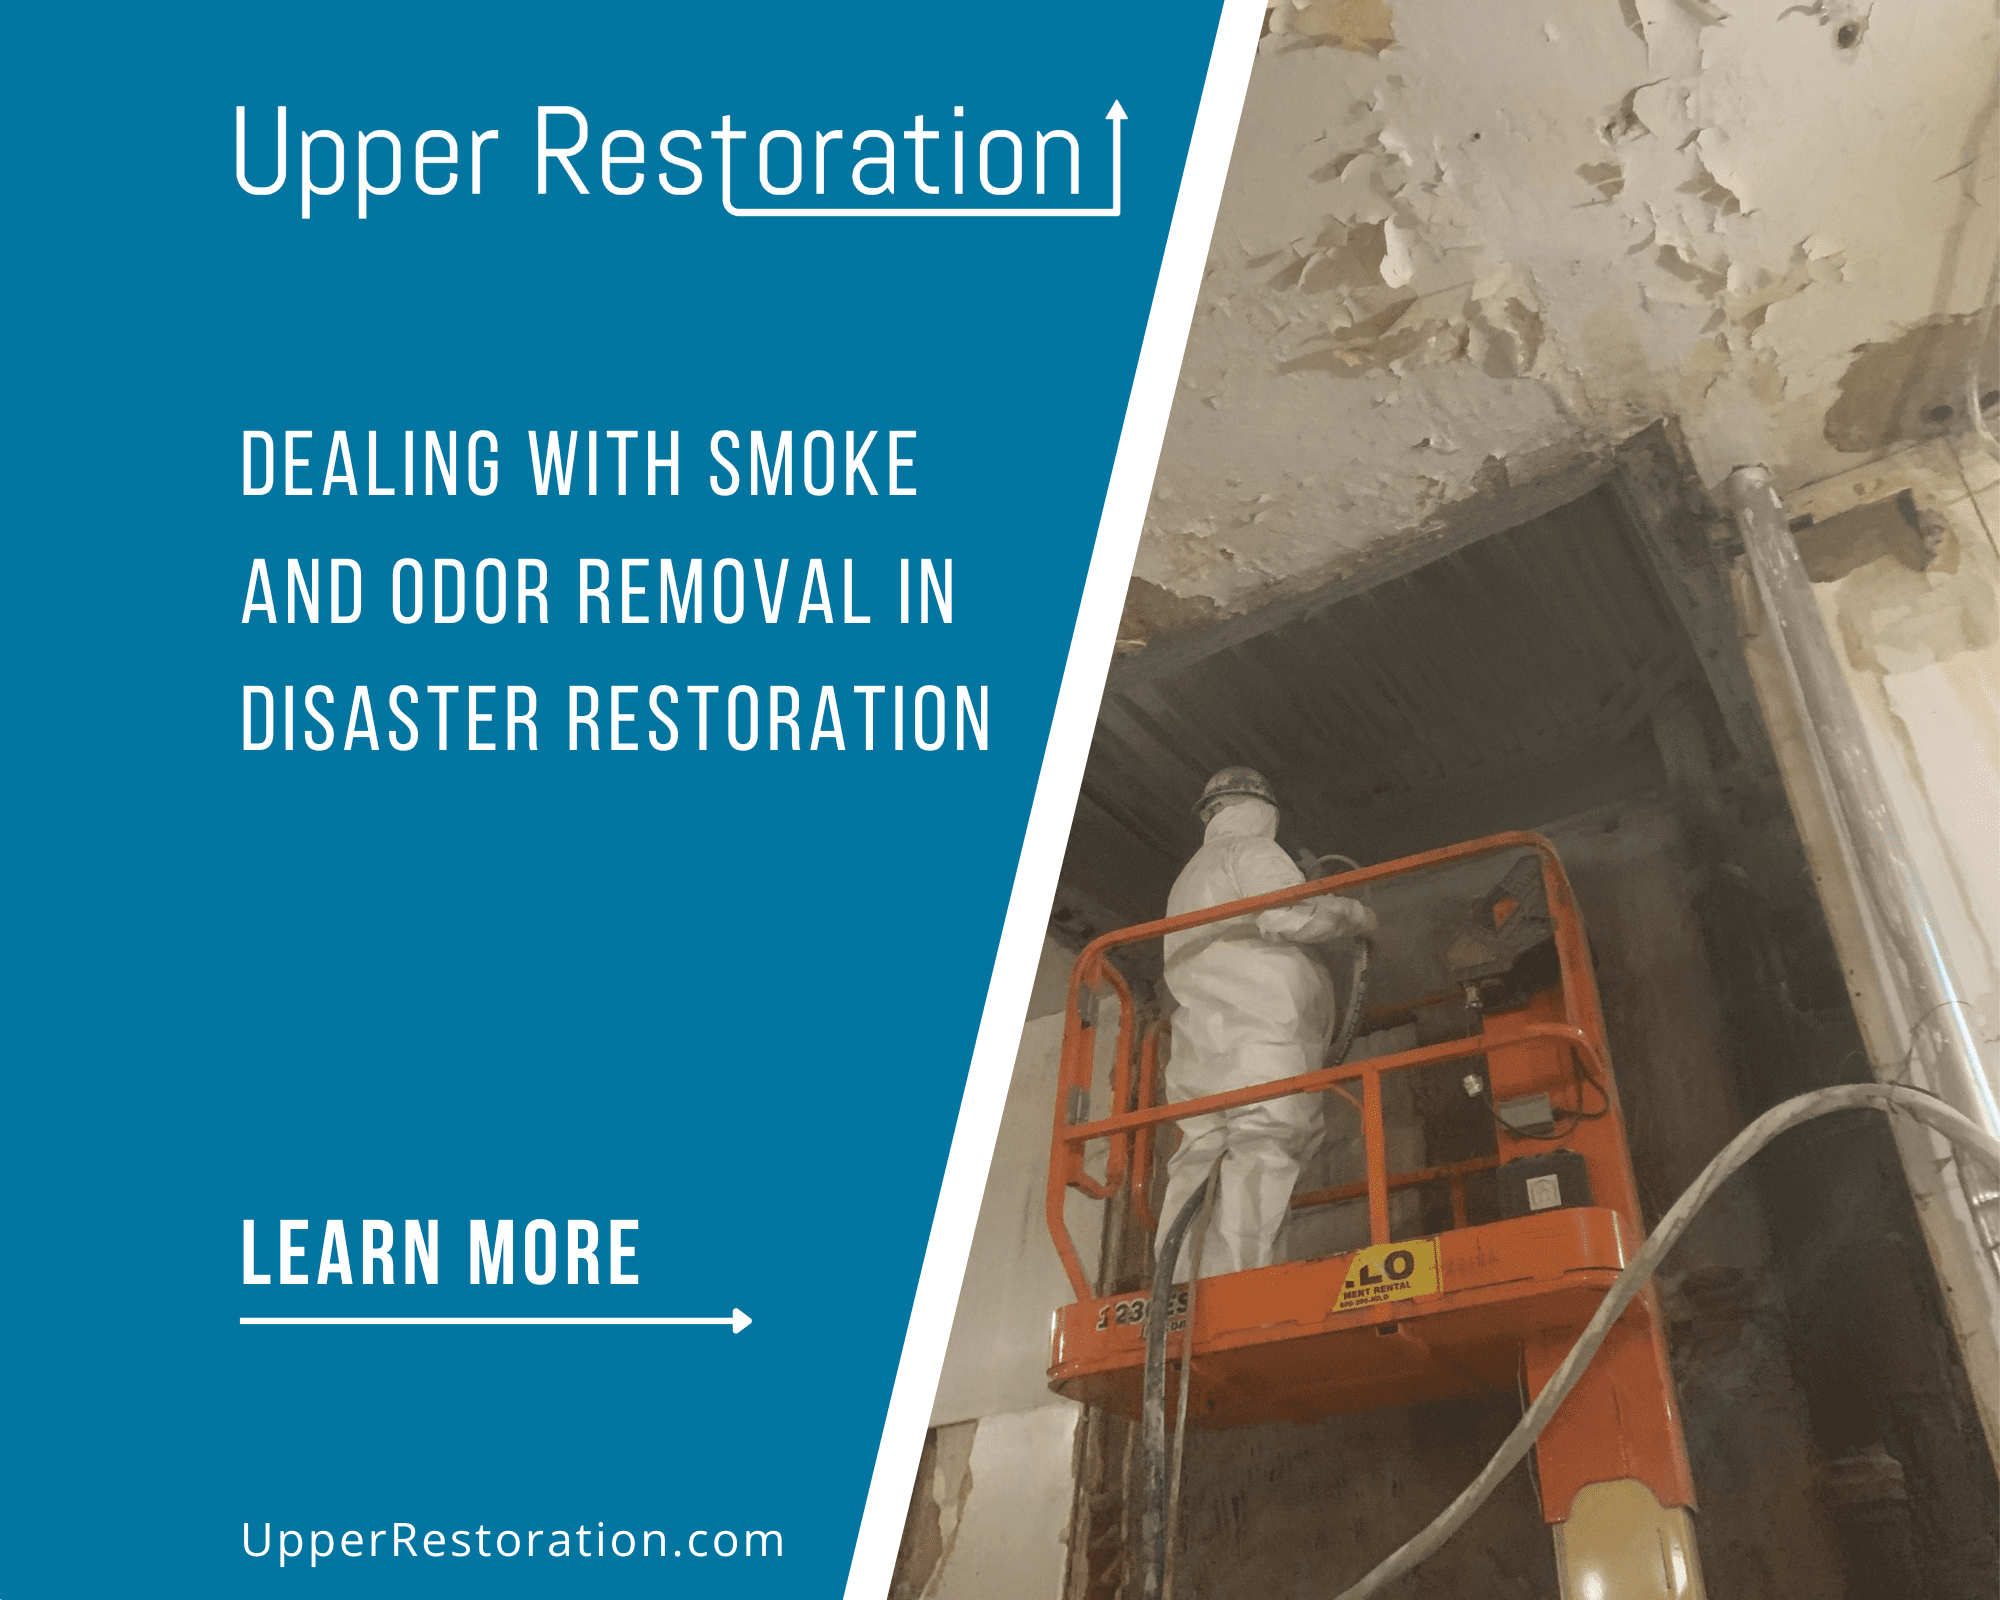 Dealing with Smoke and Odor Removal in Disaster Restoration